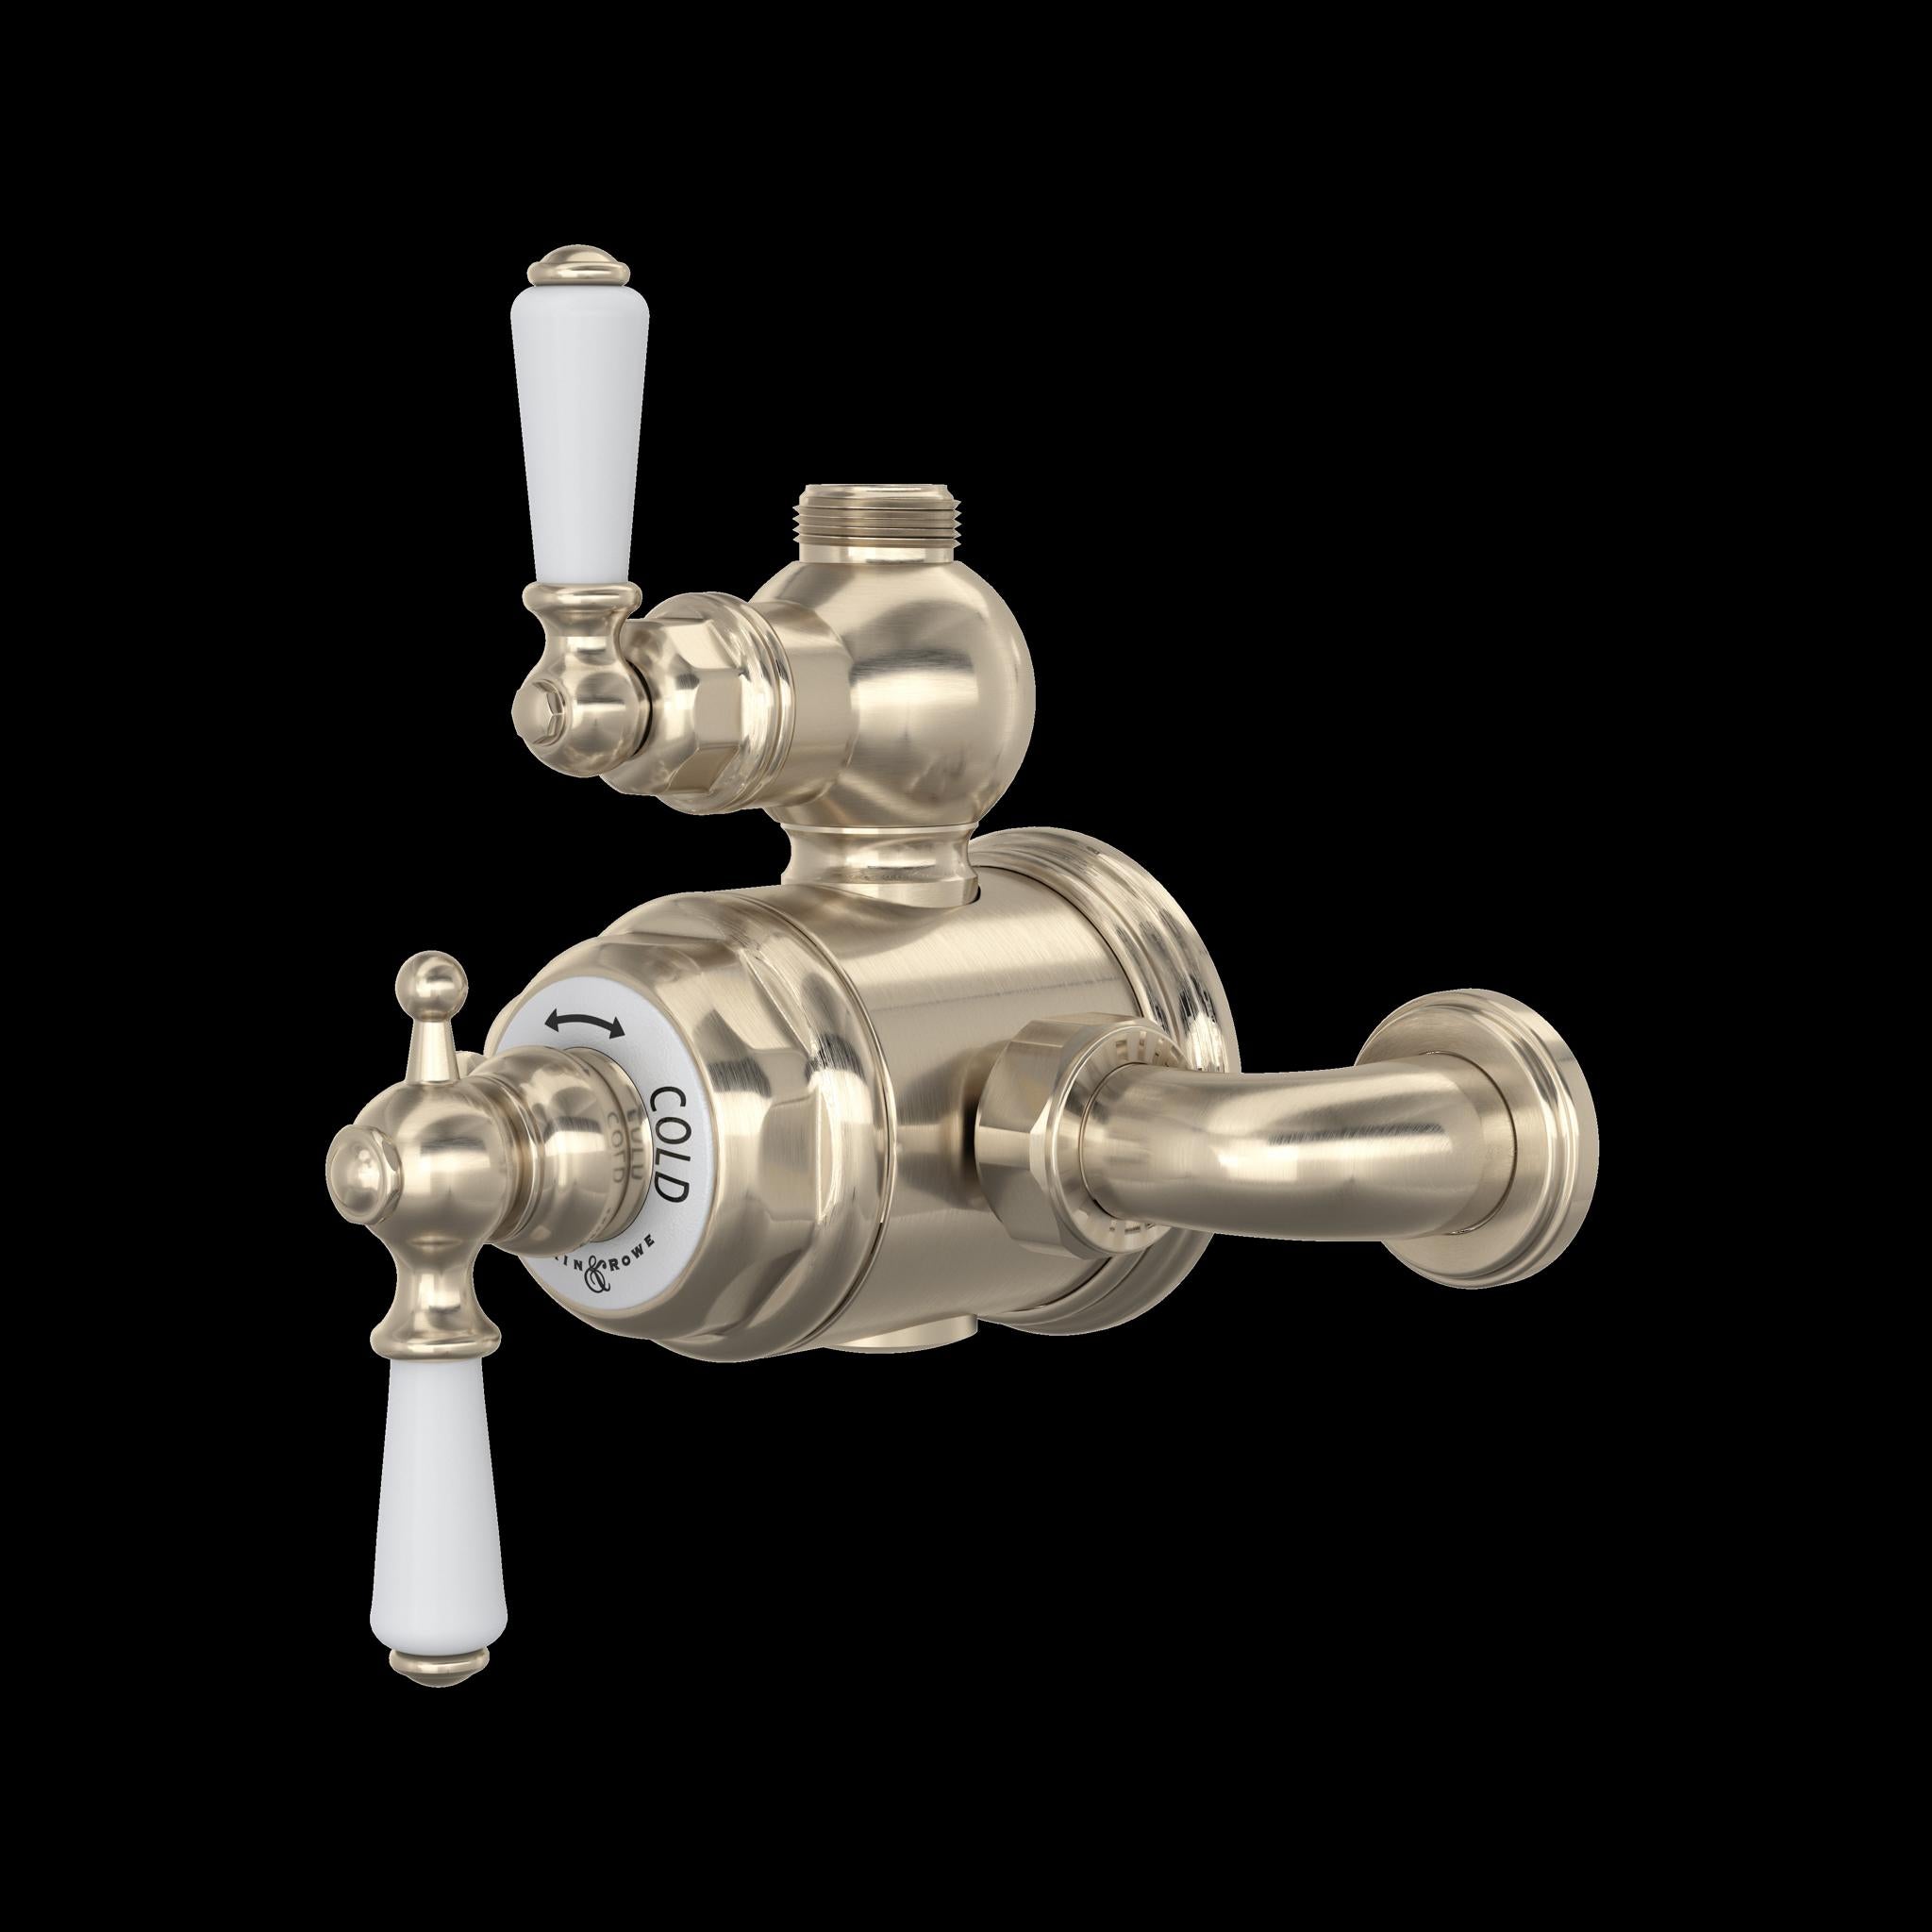 Perrin & Rowe U.5550 Edwardian 3/4" Exposed Therm Valve With Volume And Temperature Control